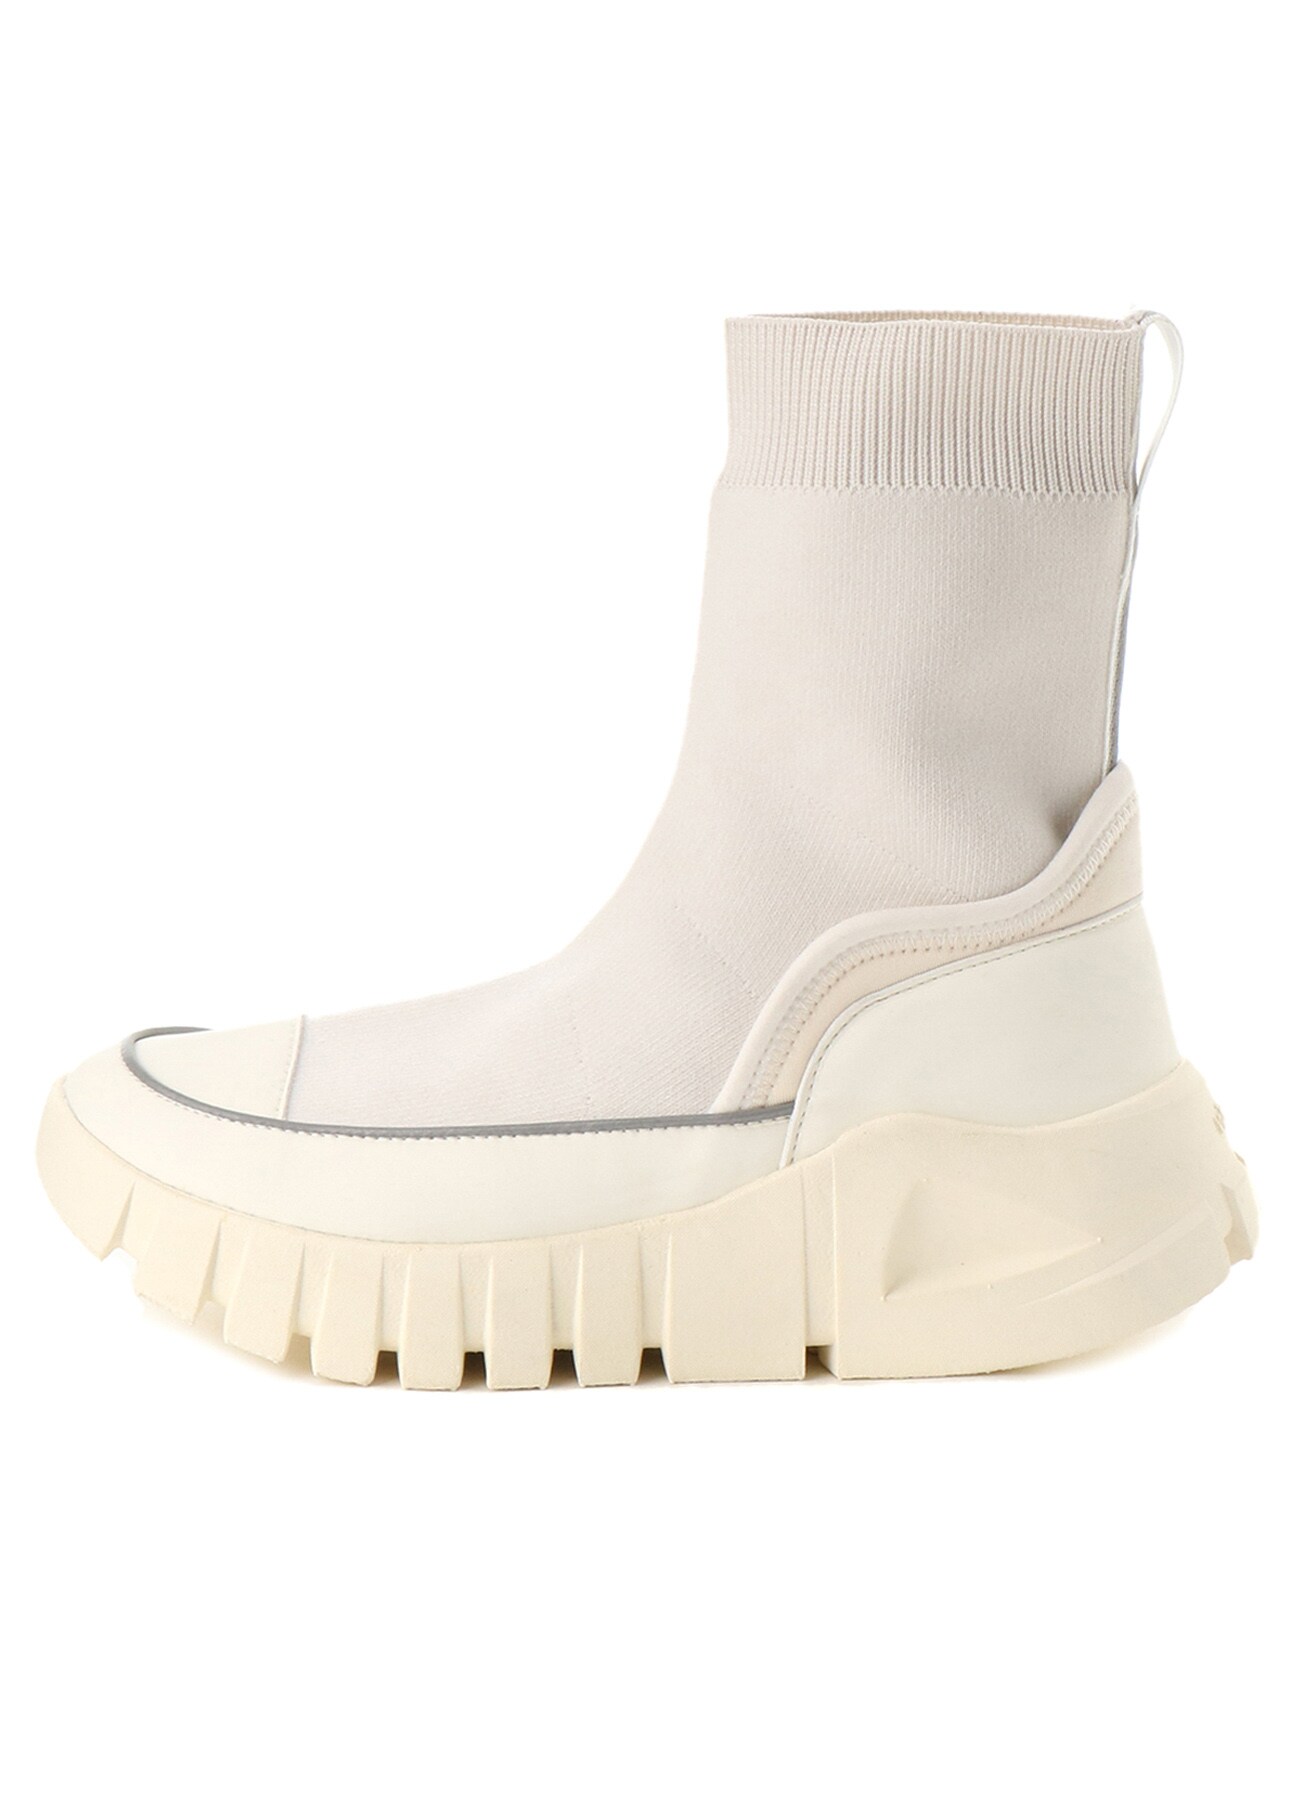 POLYESTER KNIT DAD SNEAKERS